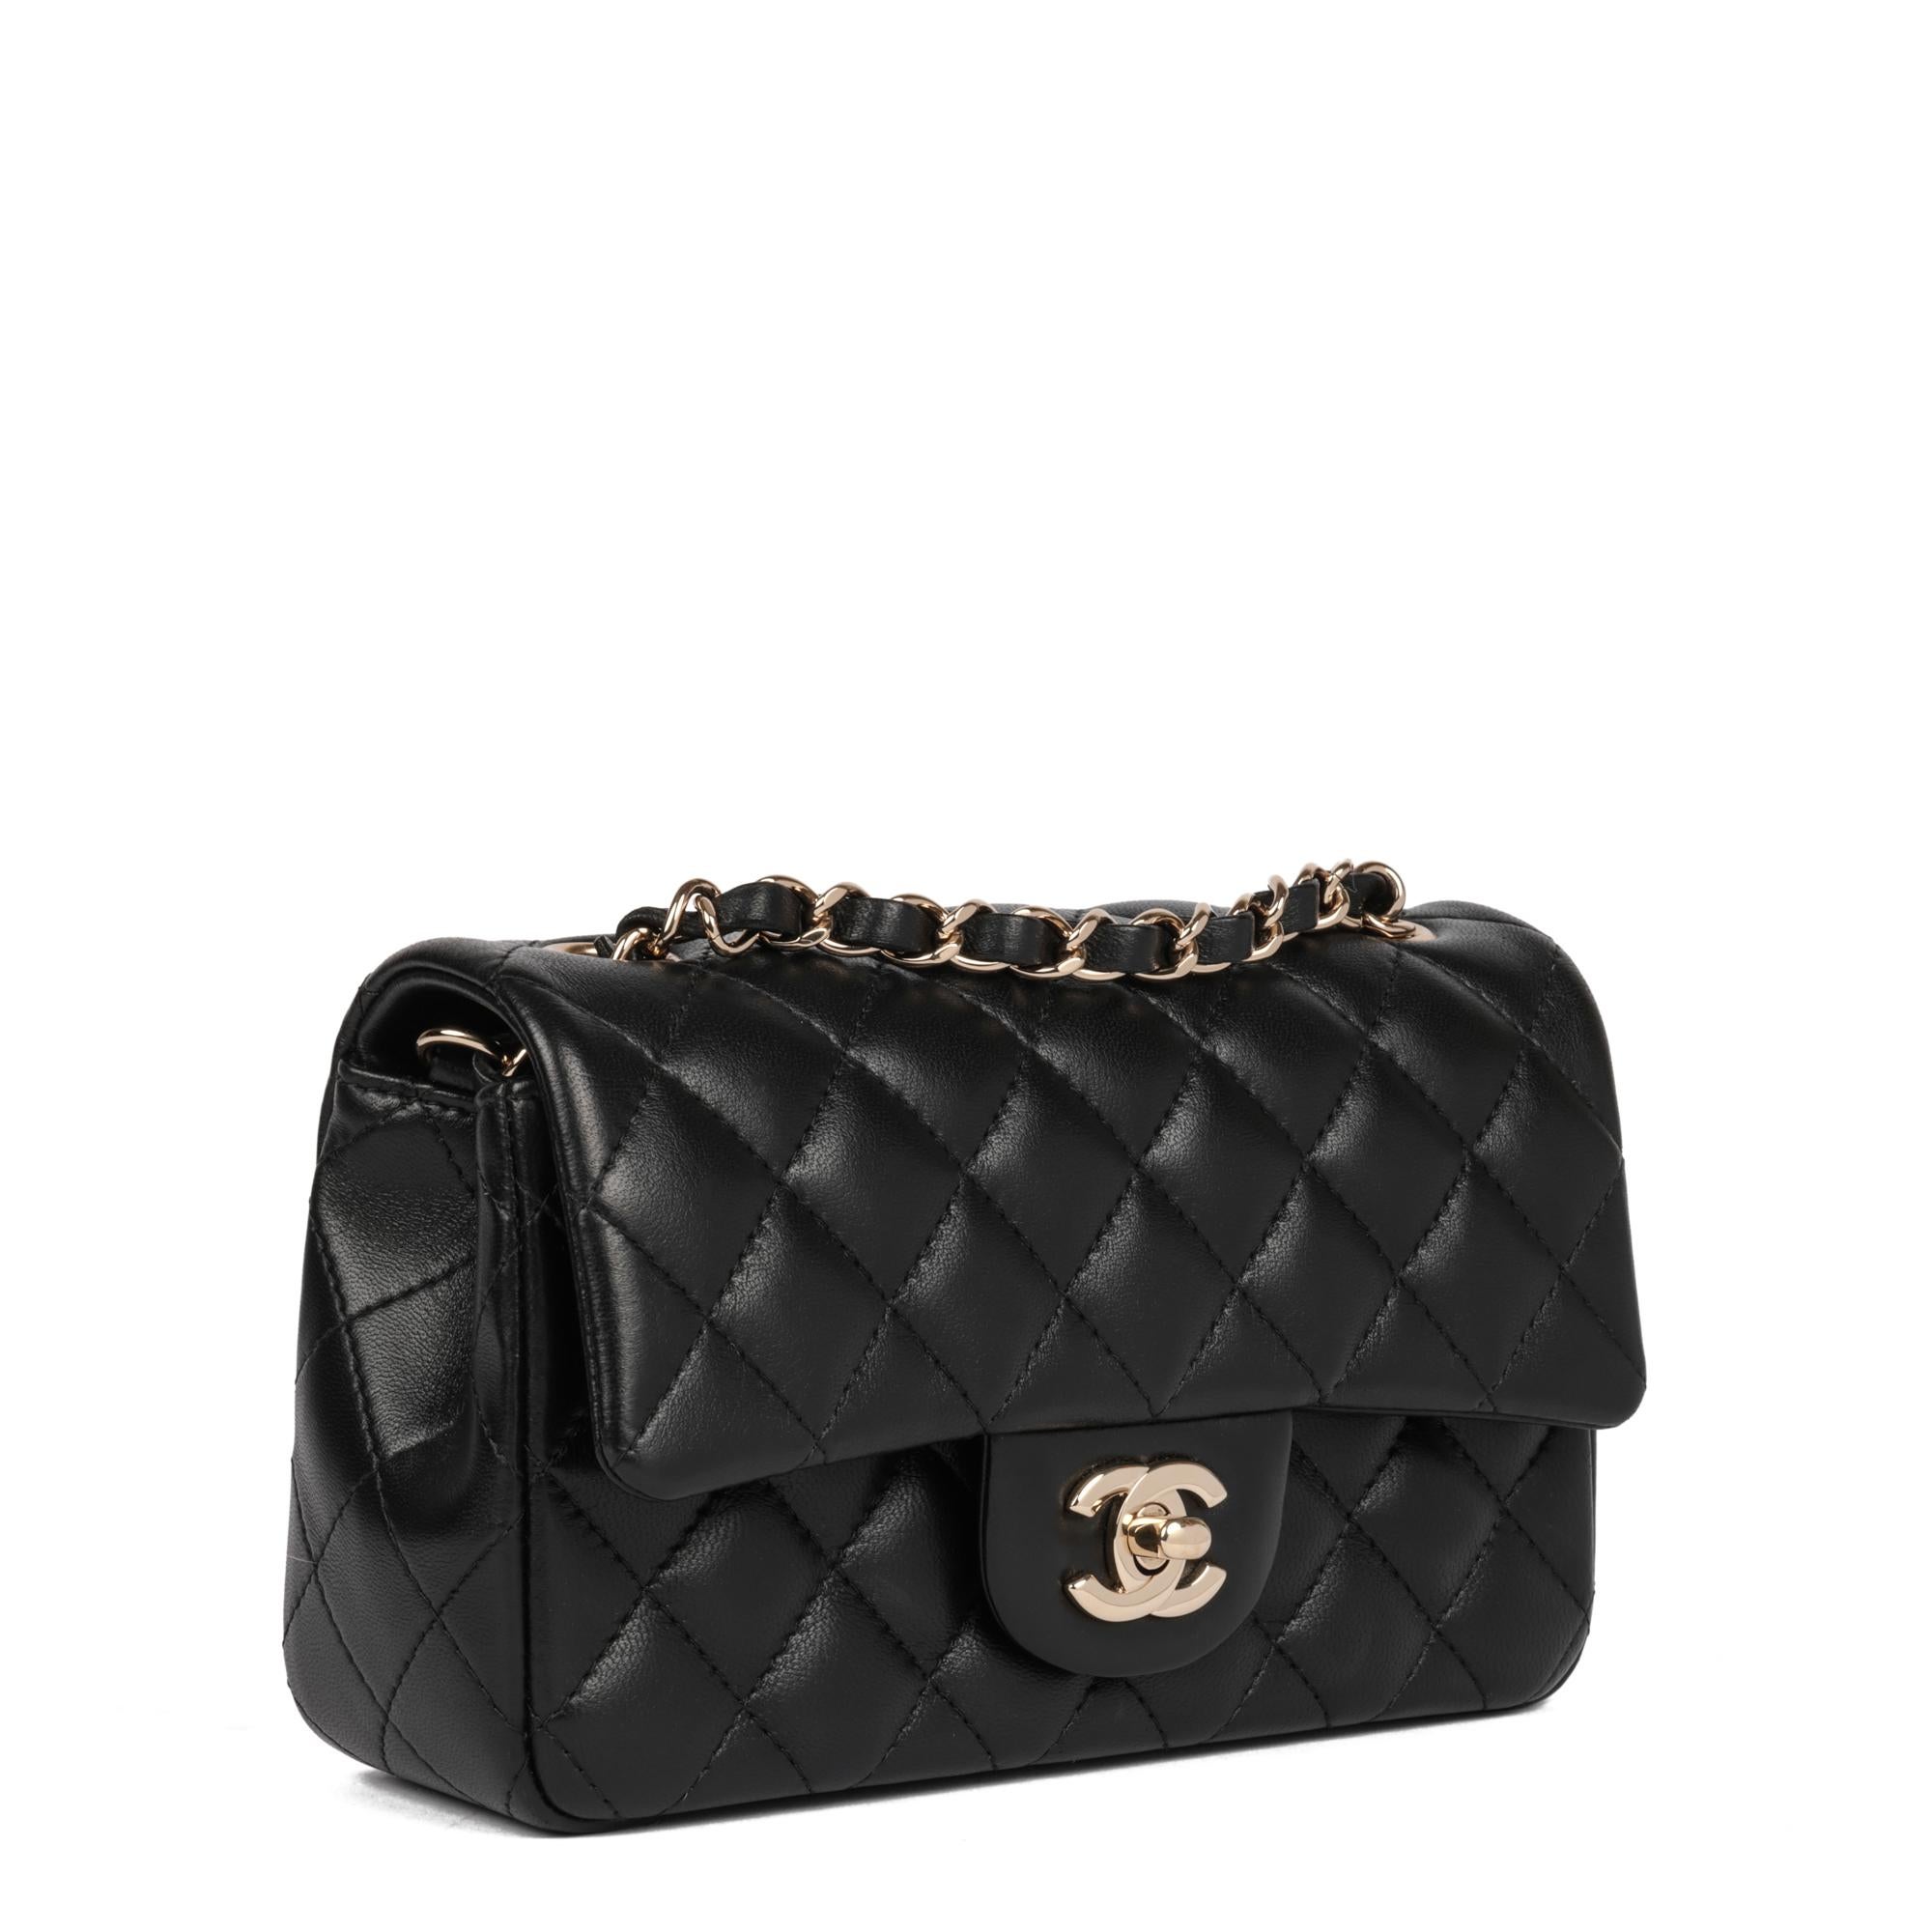 Chanel Black Quilted Lambskin Rectangular Mini Flap Bag

CONDITION NOTES
The exterior is exceptional condition with no signs of use.
The interior is in exceptional condition with no signs of use.
The hardware is in exceptional condition with no